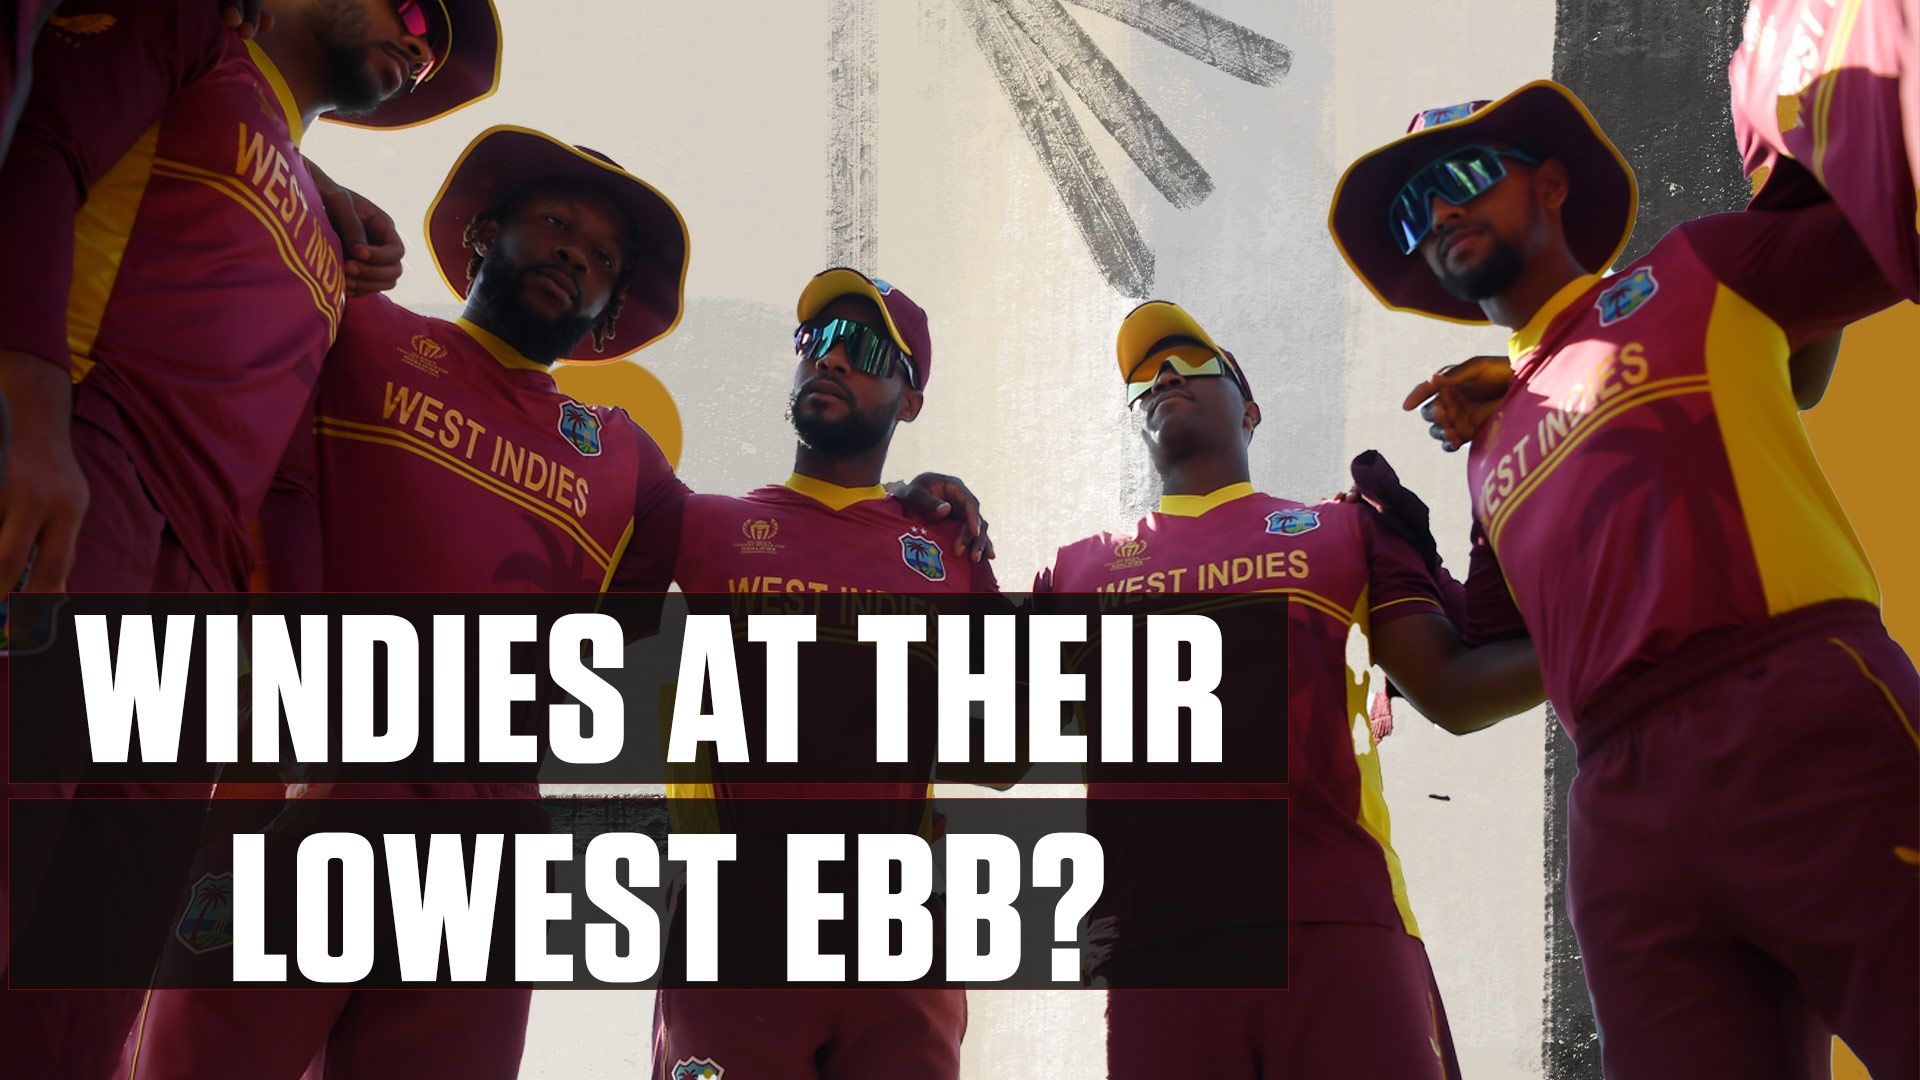 The rivalry continues! The countdown to West Indies Championship is on